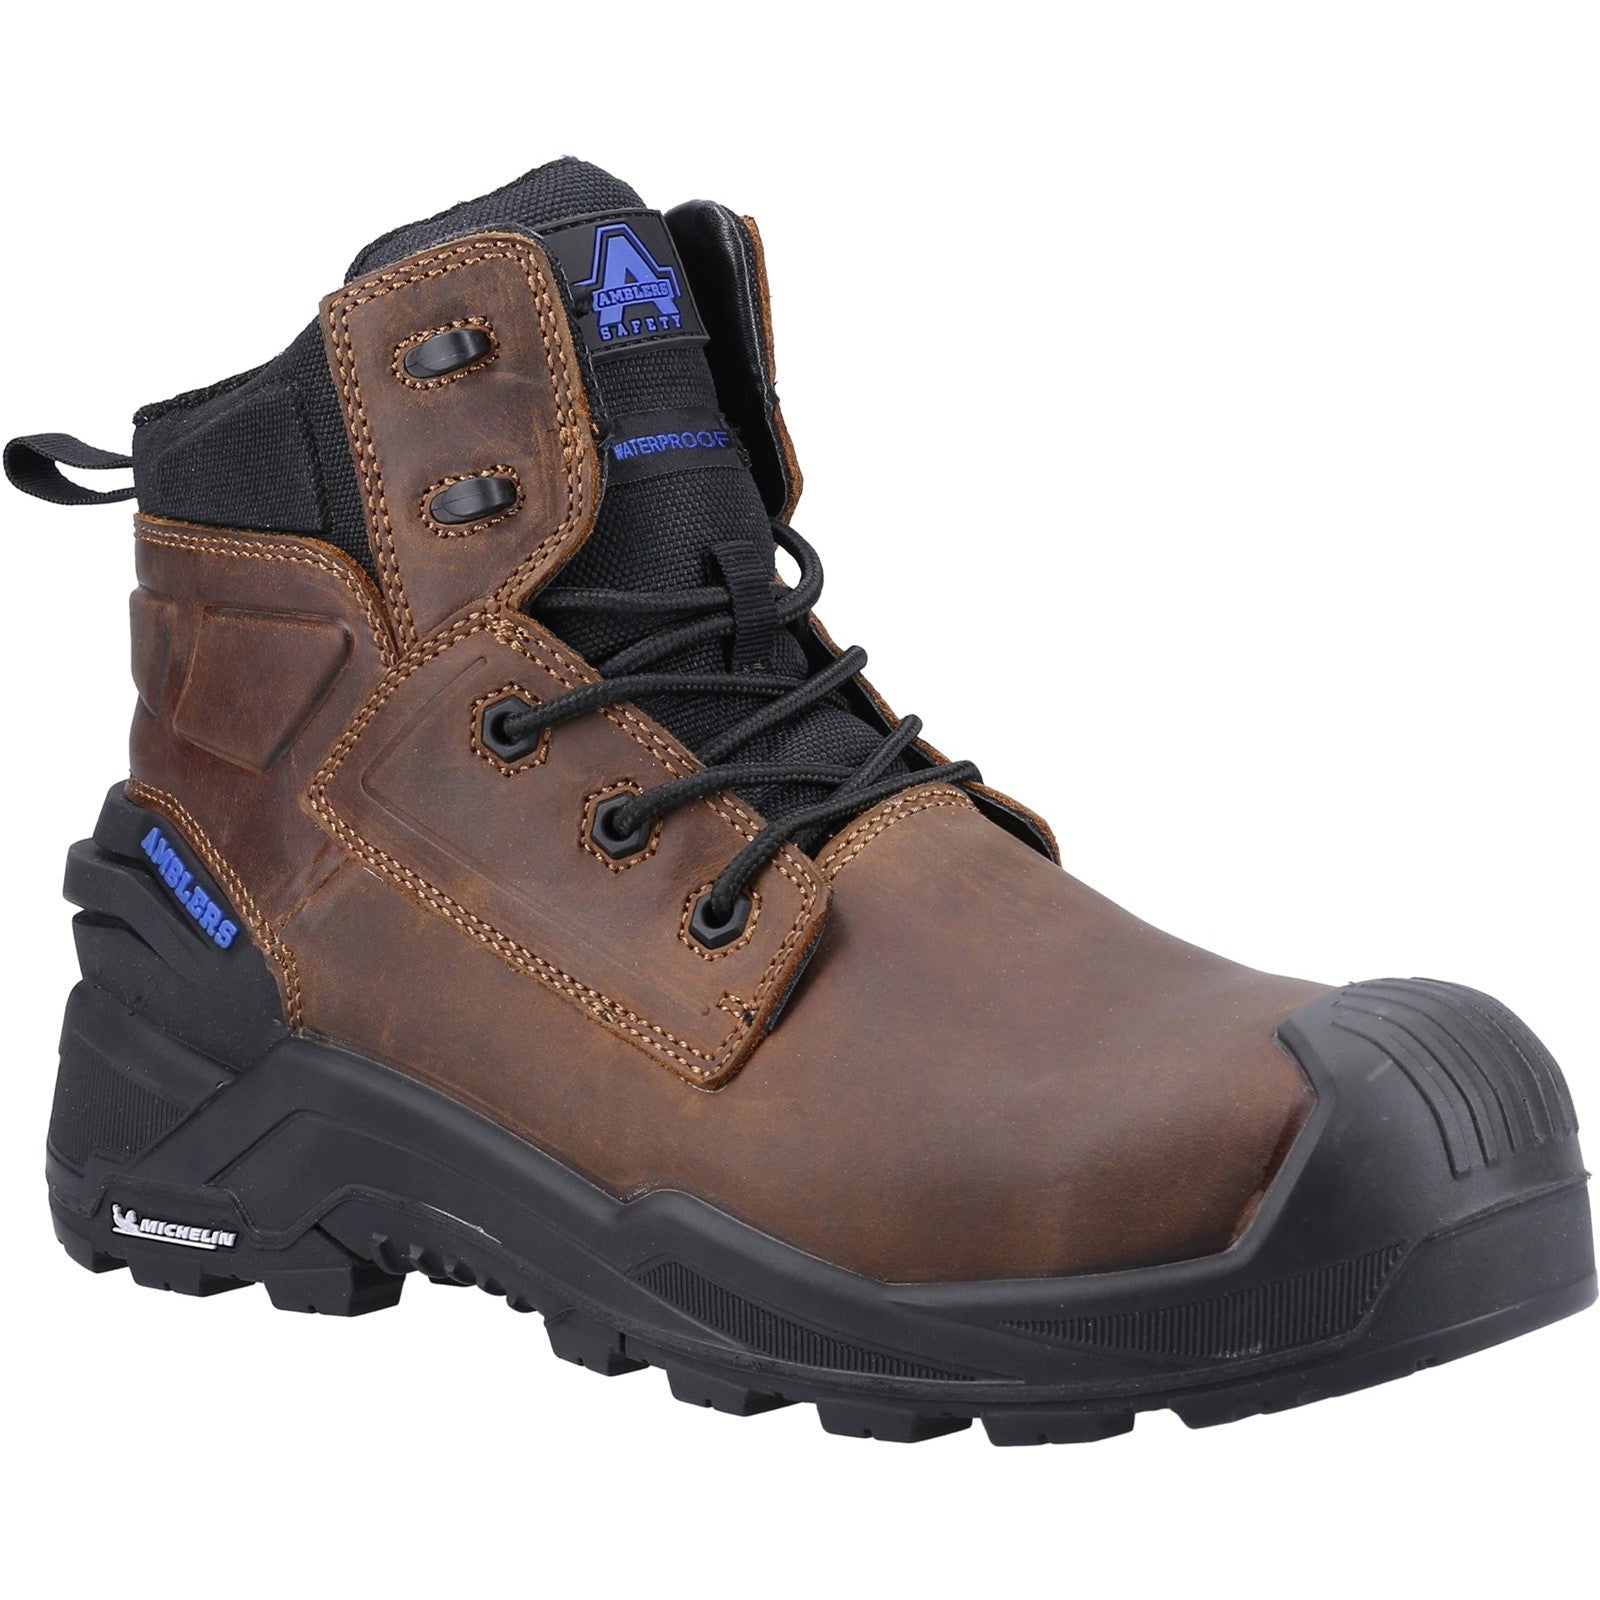 Amblers 980C Safety Boots